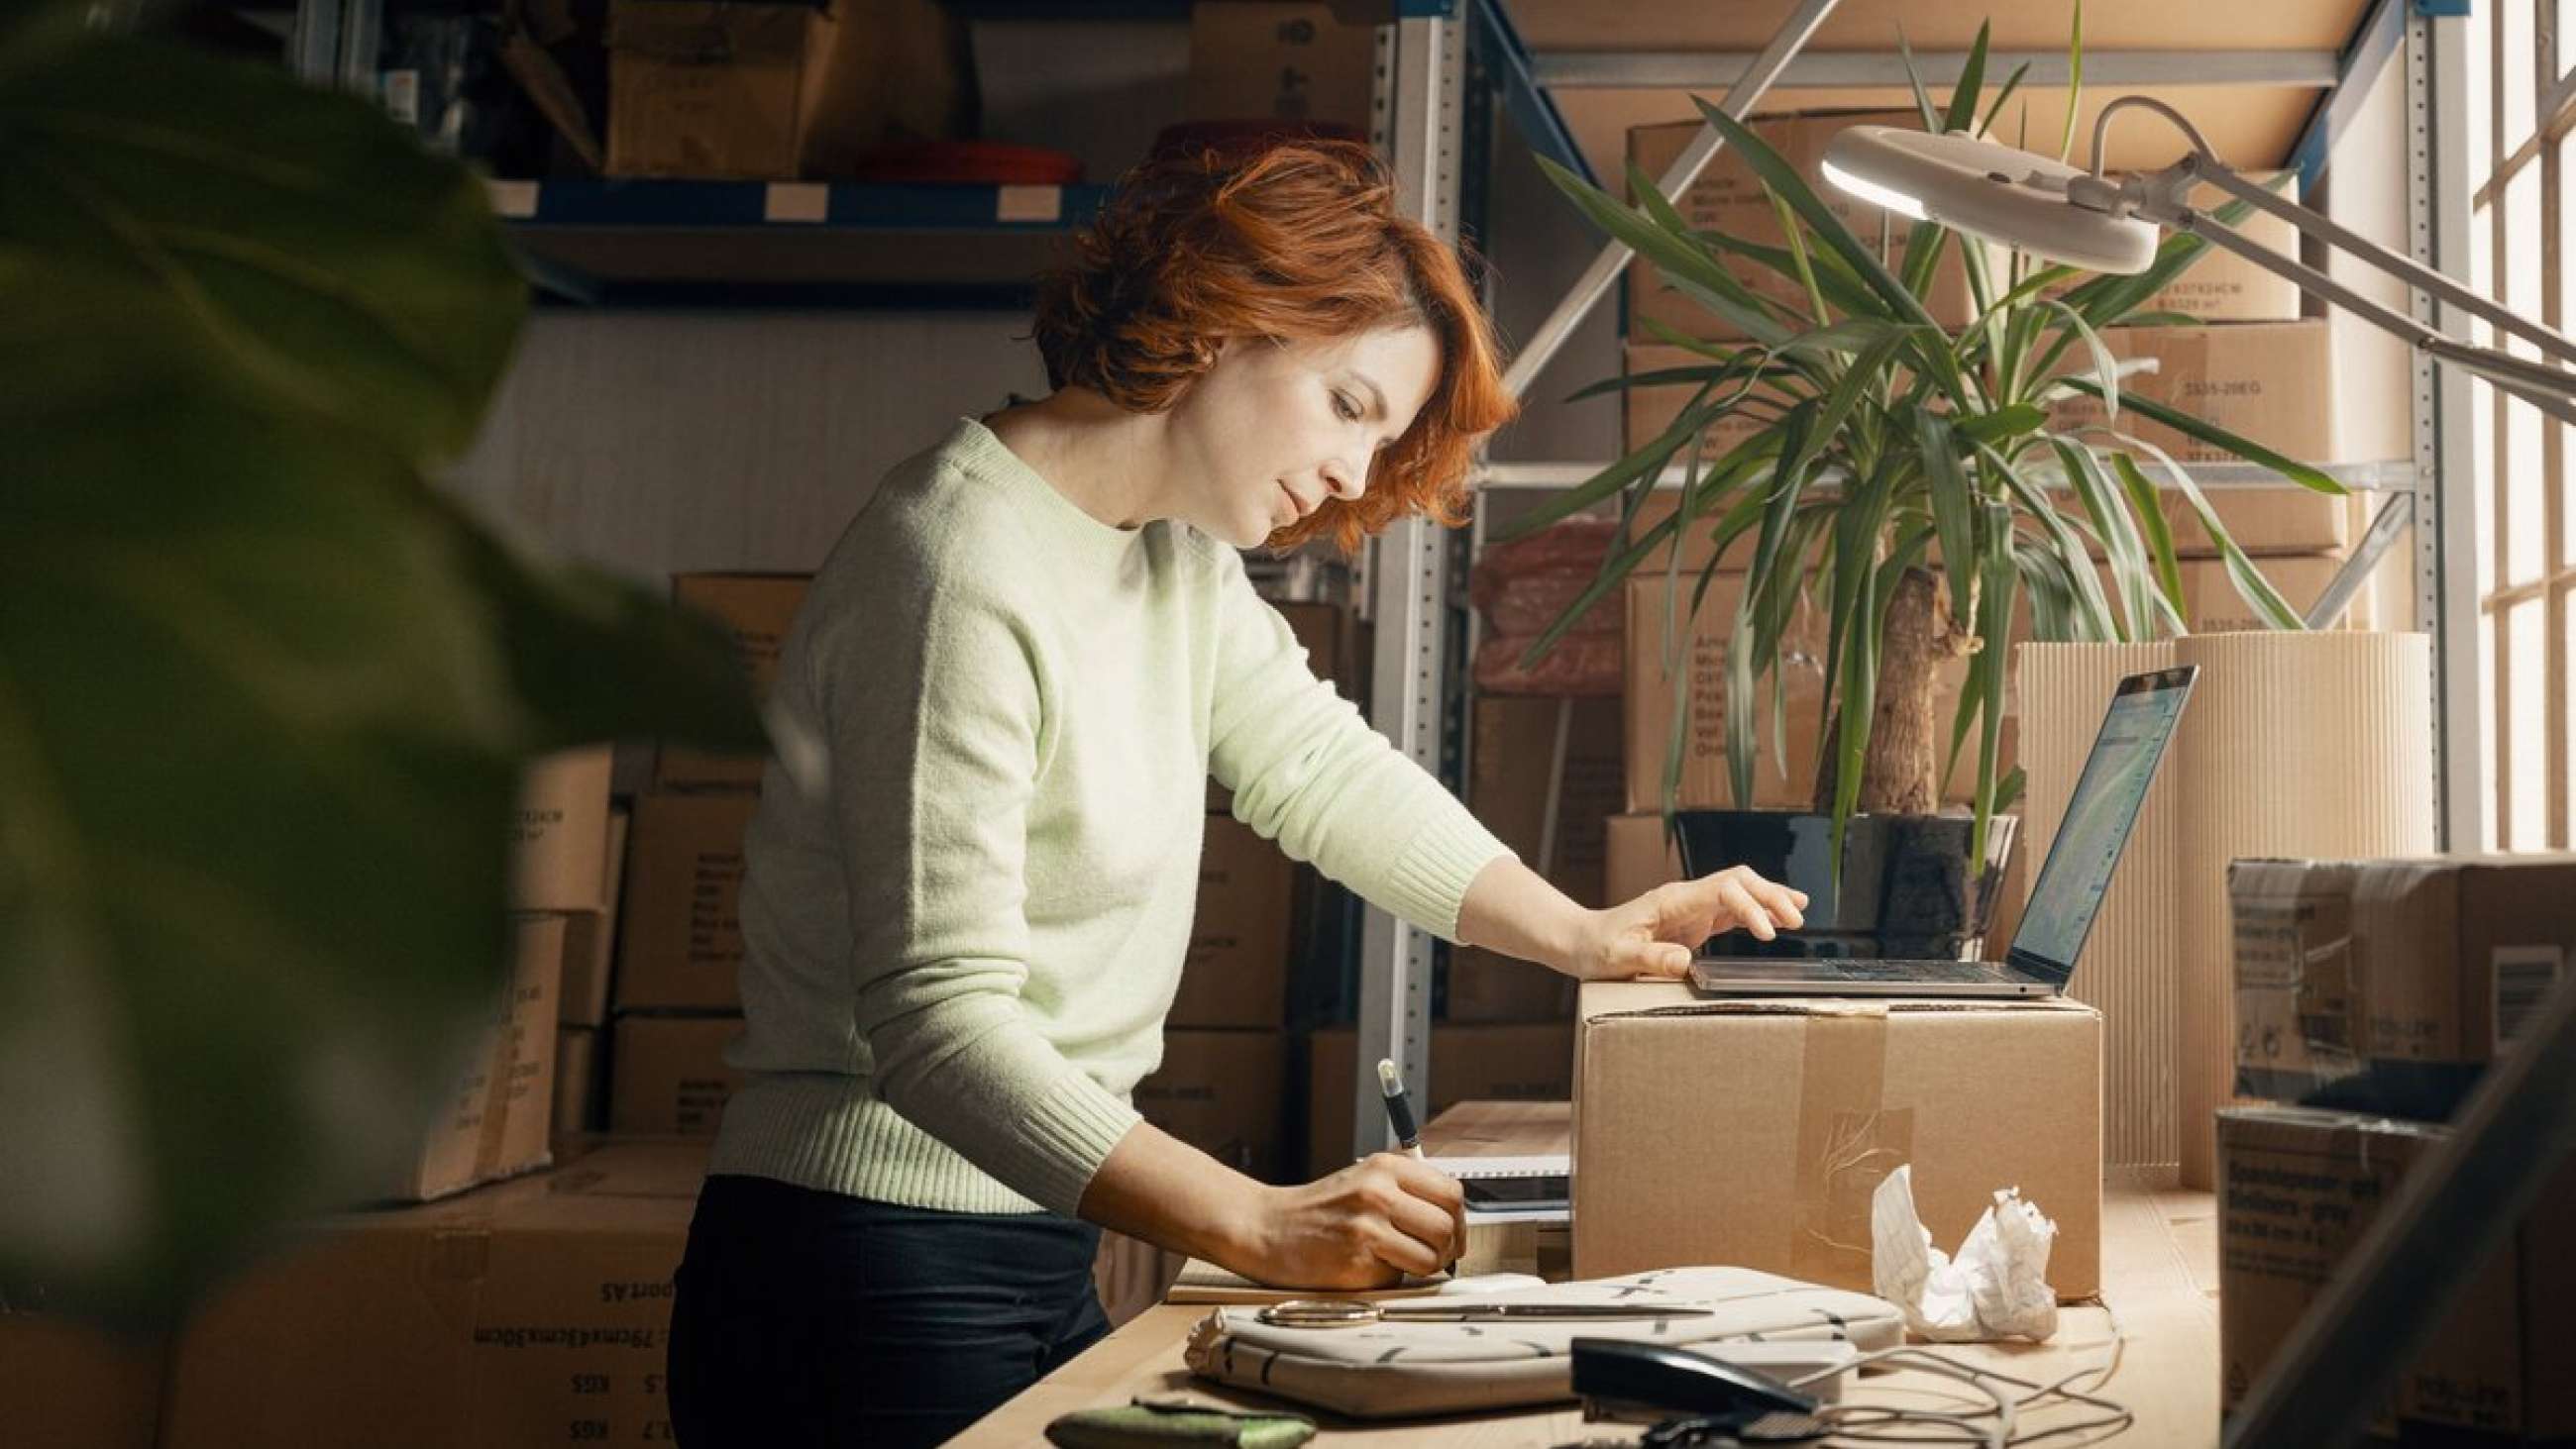 A female online store owner stands by a cardboard box on a work table with many drawers in the background. She takes notes in a pad while holding the other hand on an open laptop.